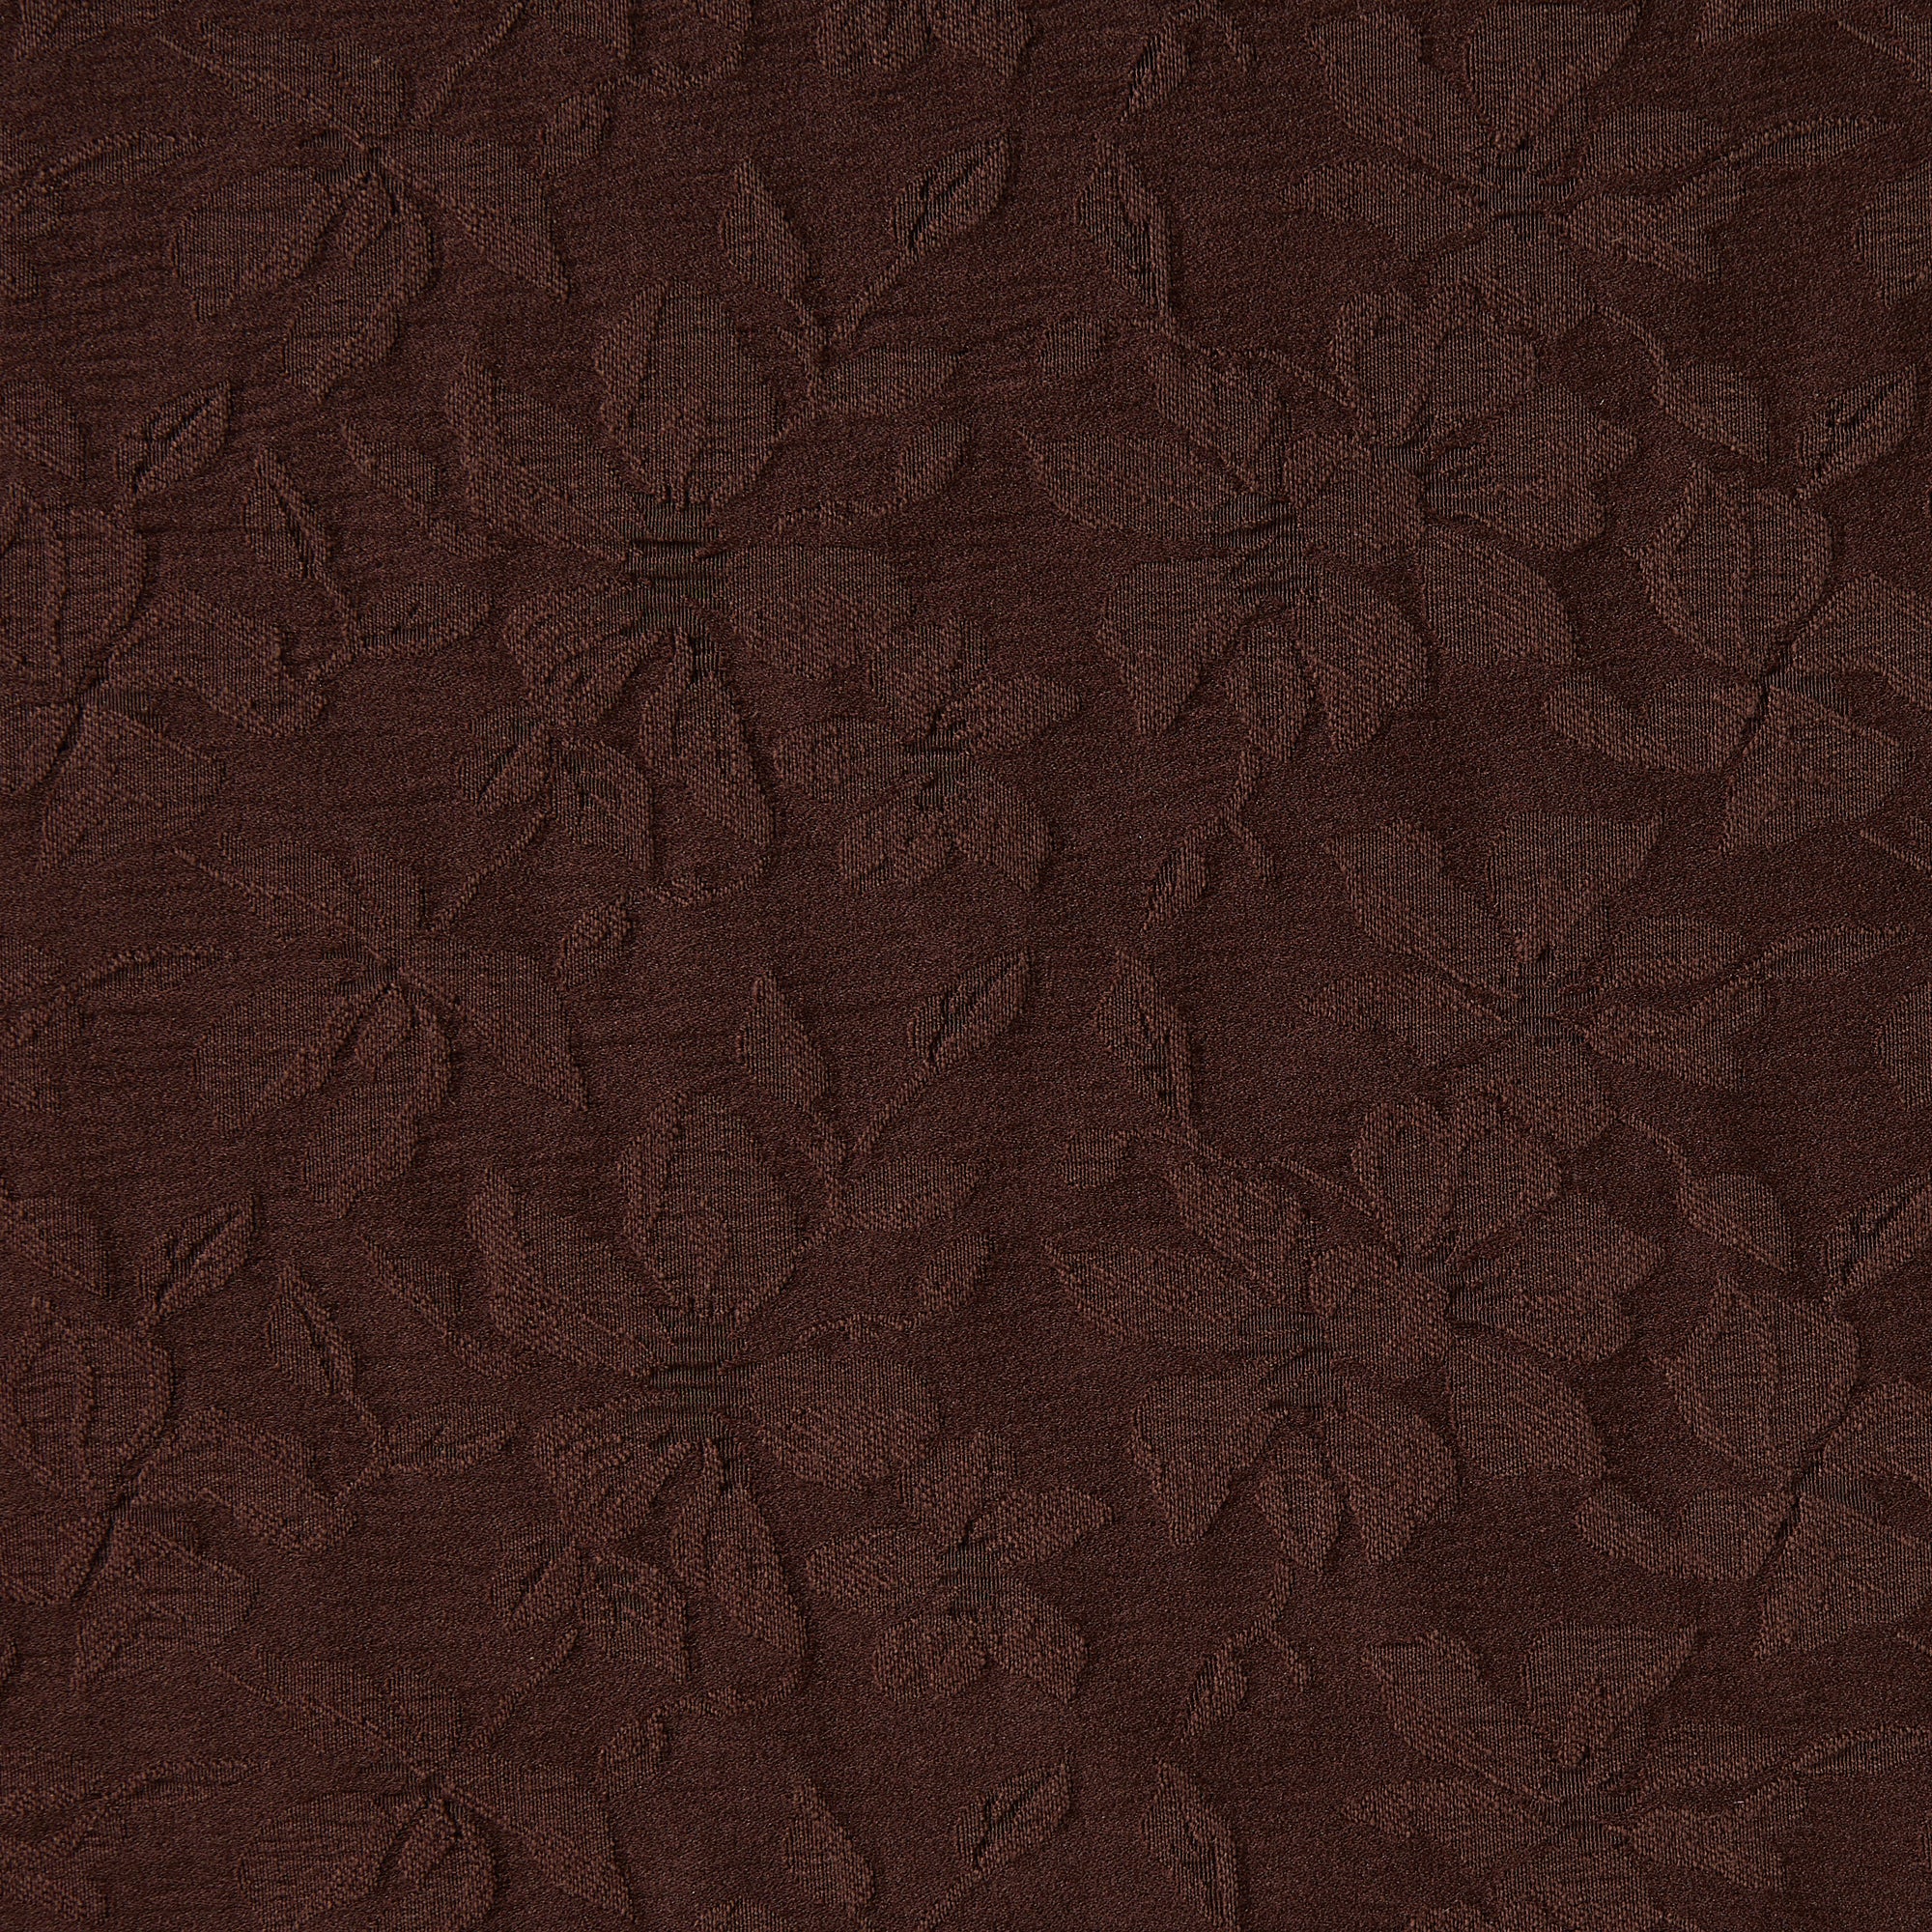 Displaying liliy a bark colored fabric in a classic floral  jacquard stretch cotton polyester and spandex